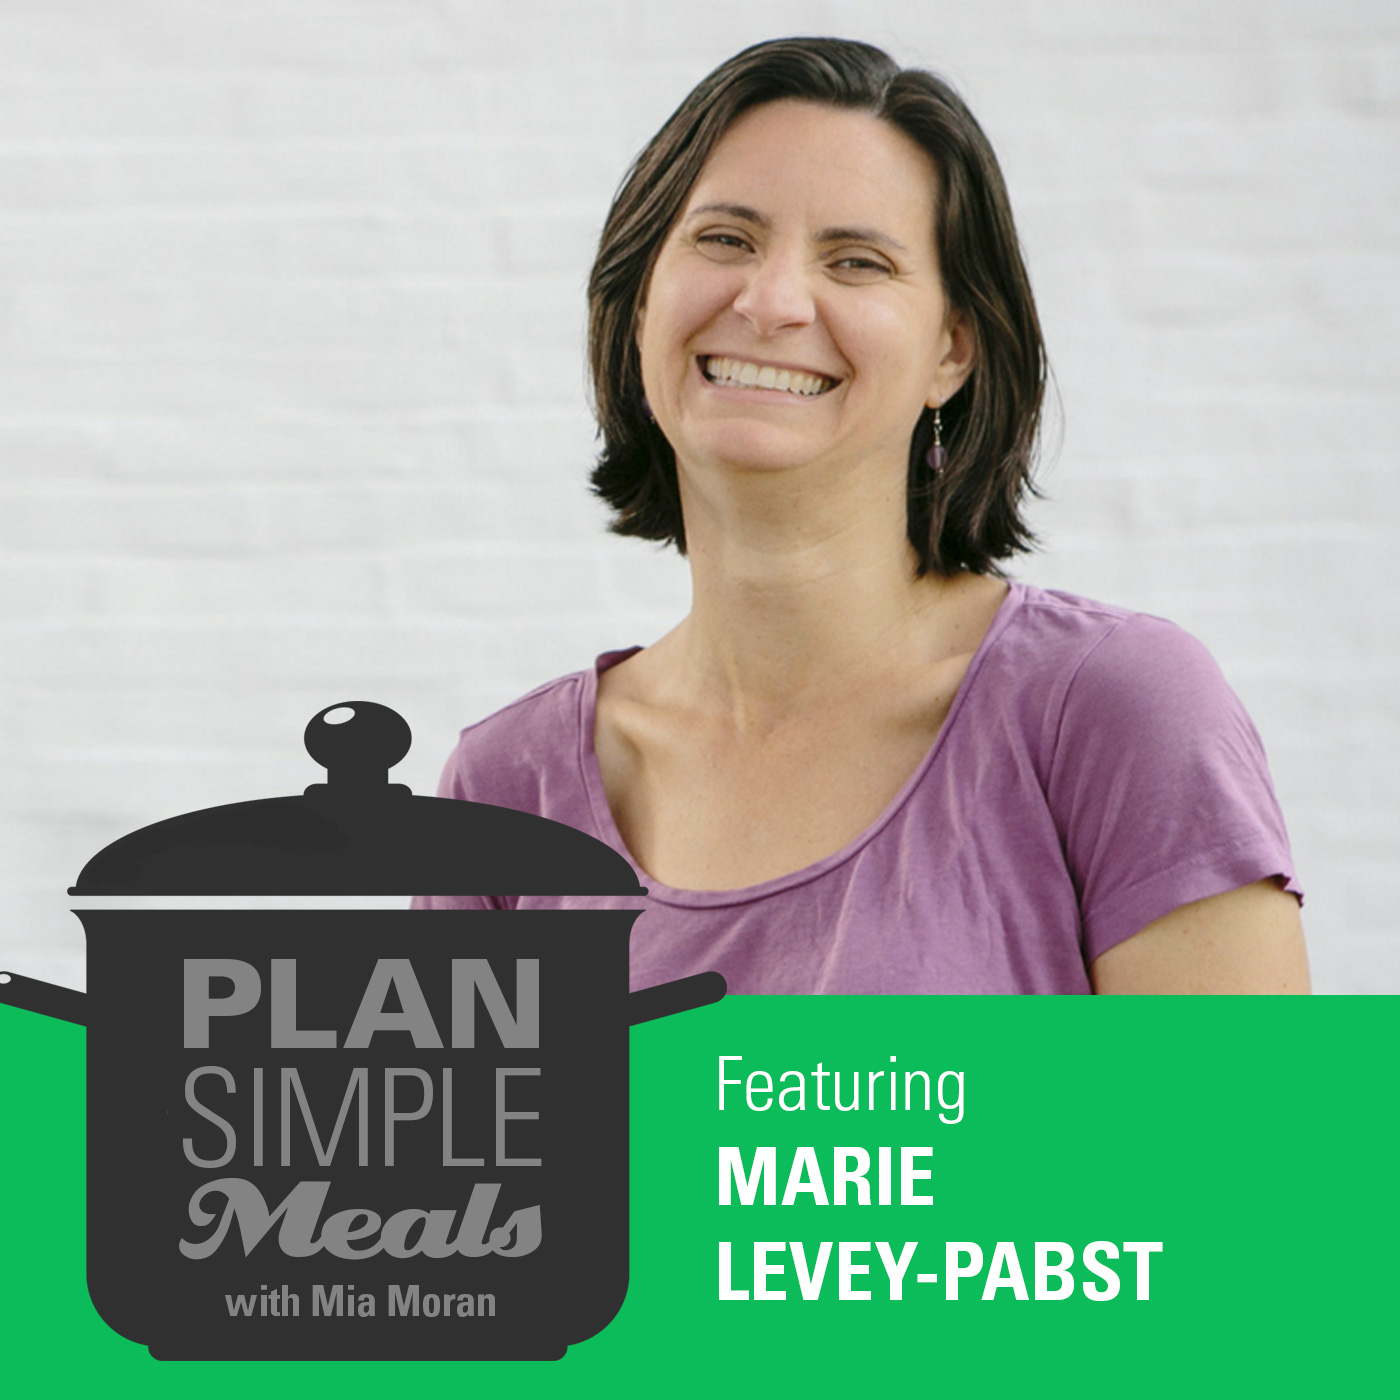 Consistency with Marie Levey-Pabst